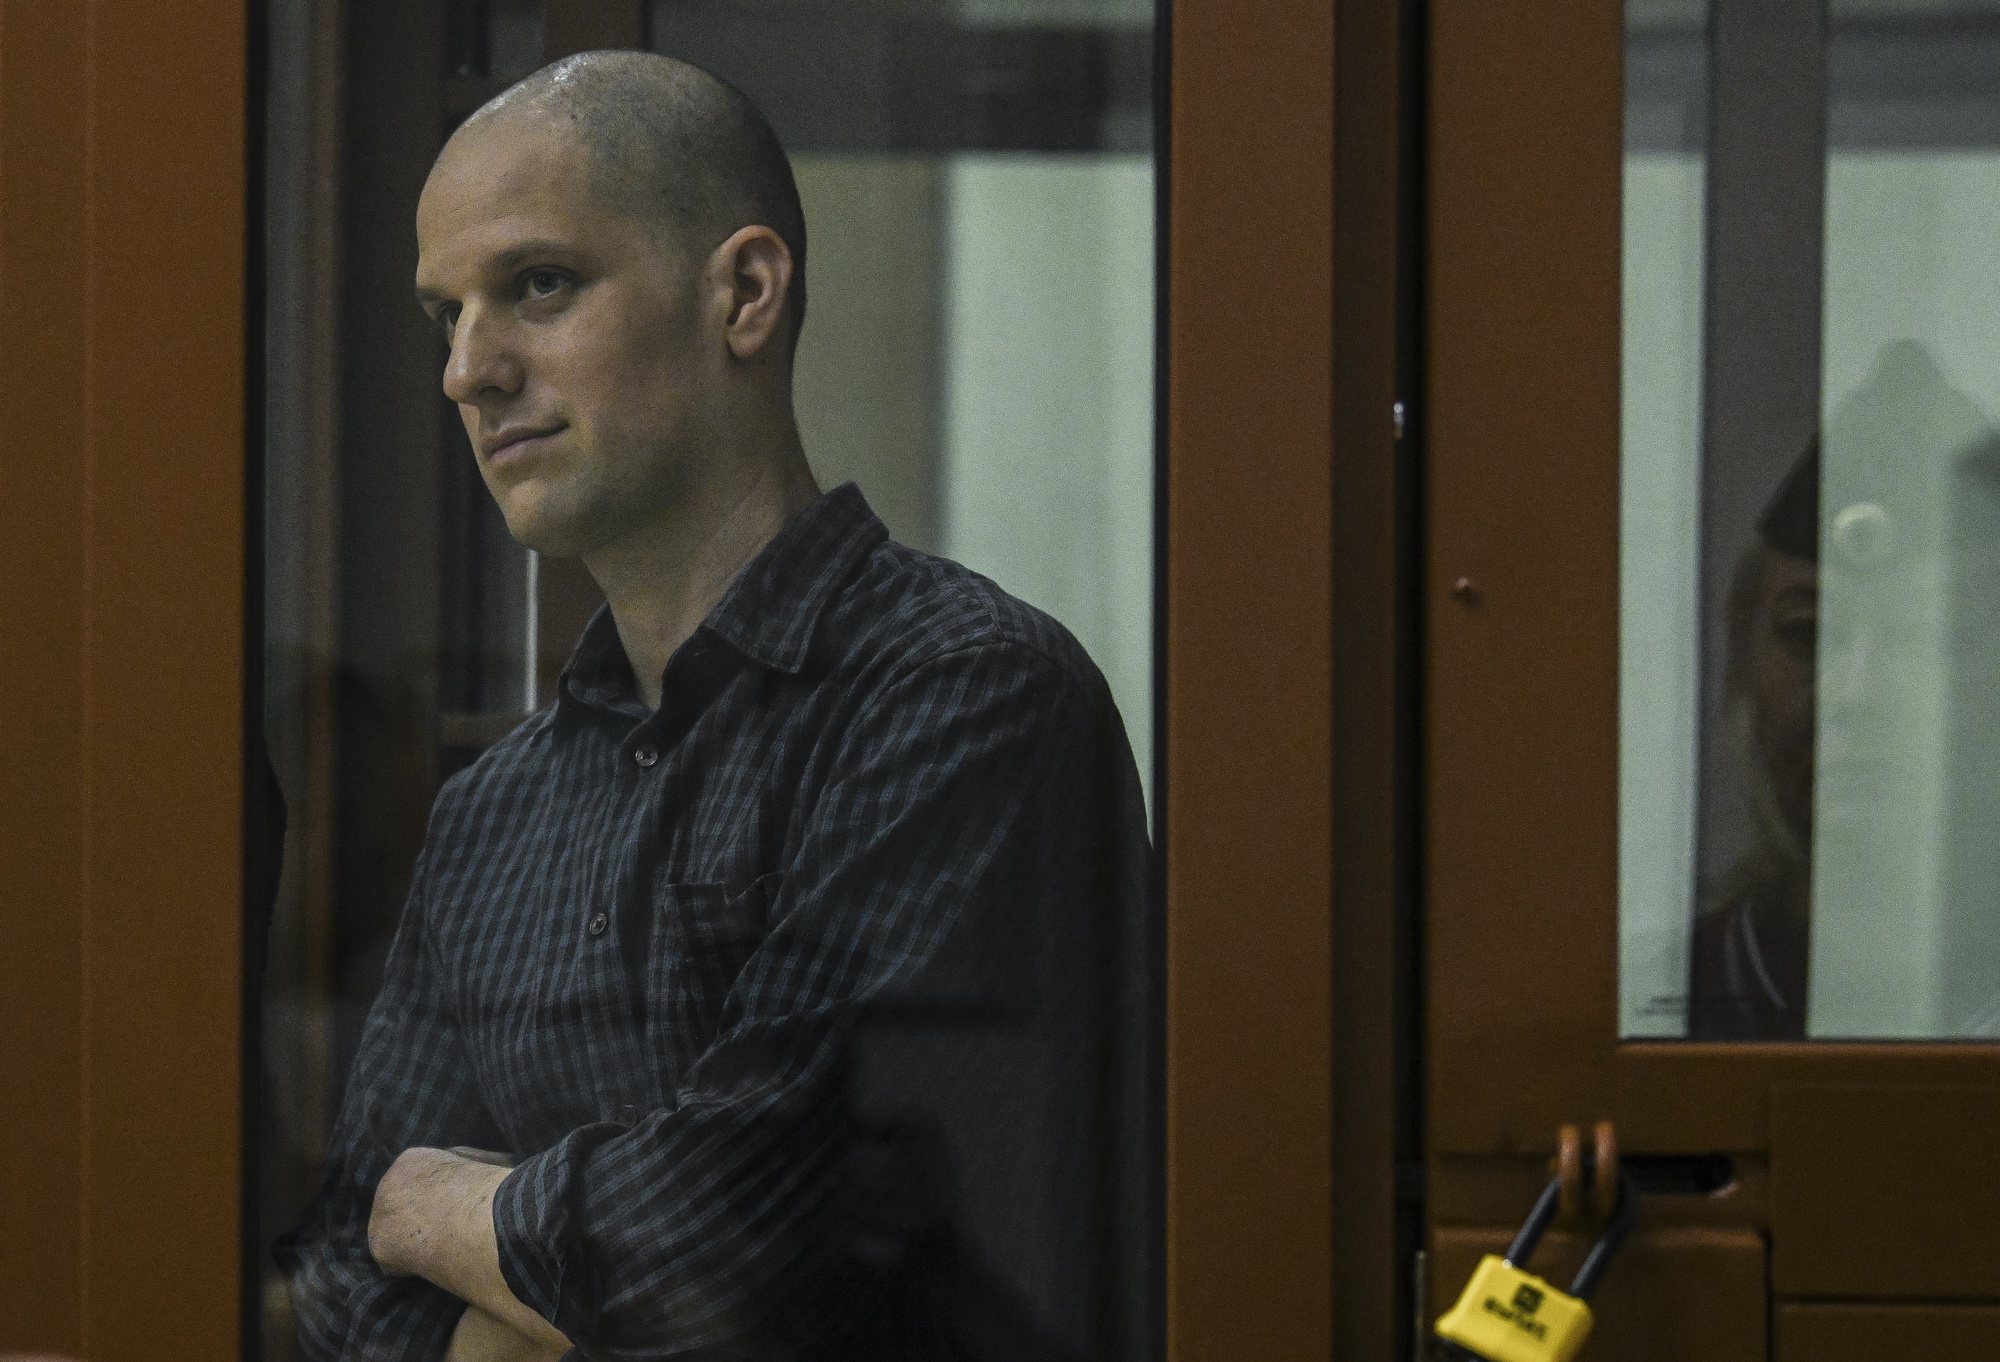 epa11439453 WSJ correspondent Evan Gershkovich stands in a glass cage prior to a hearing in Yekaterinburg&#039;s Sverdlovsk Regional Court, Yekaterinburg, Russia, 26 June 2024. Evan Gershkovich, a US journalist of The Wall Street Journal covering Russia, was detained in Yekaterinburg on 29 March 2023. The Russia&#039;s Federal Security Service (FSB) claimed that on the instructions of the American authorities, the journalist collected information constituting a state secret about one of the enterprises of the Russian military-industrial complex. He is charged with espionage under Art. 276 of the Criminal Code of the Russian Federation, which could carry a sentence of up to 20 years.  EPA/STRINGER